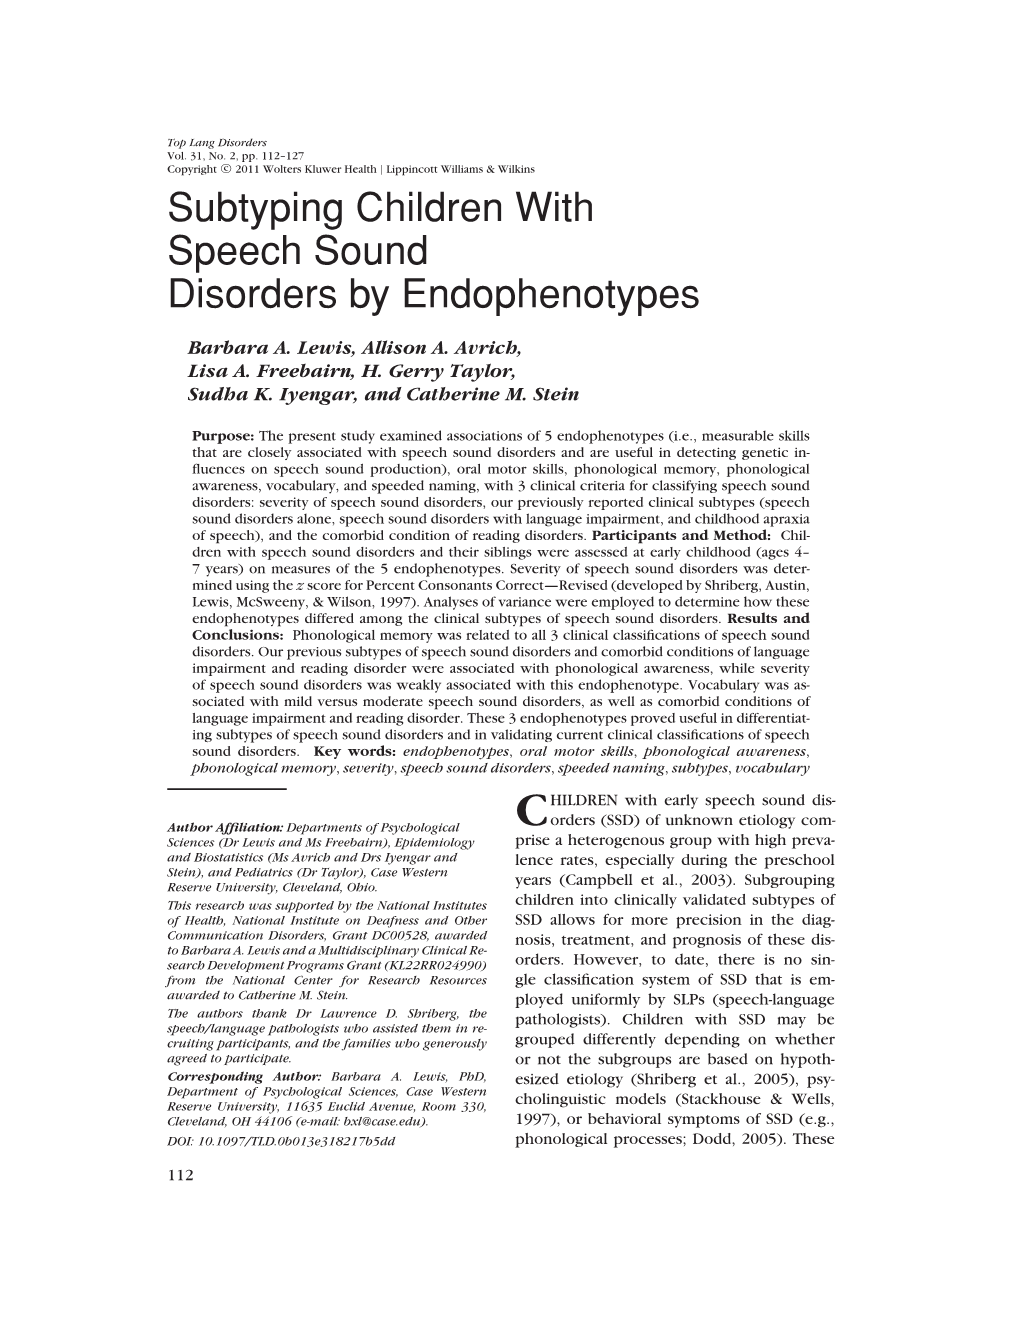 Subtyping Children with Speech Sound Disorders by Endophenotypes